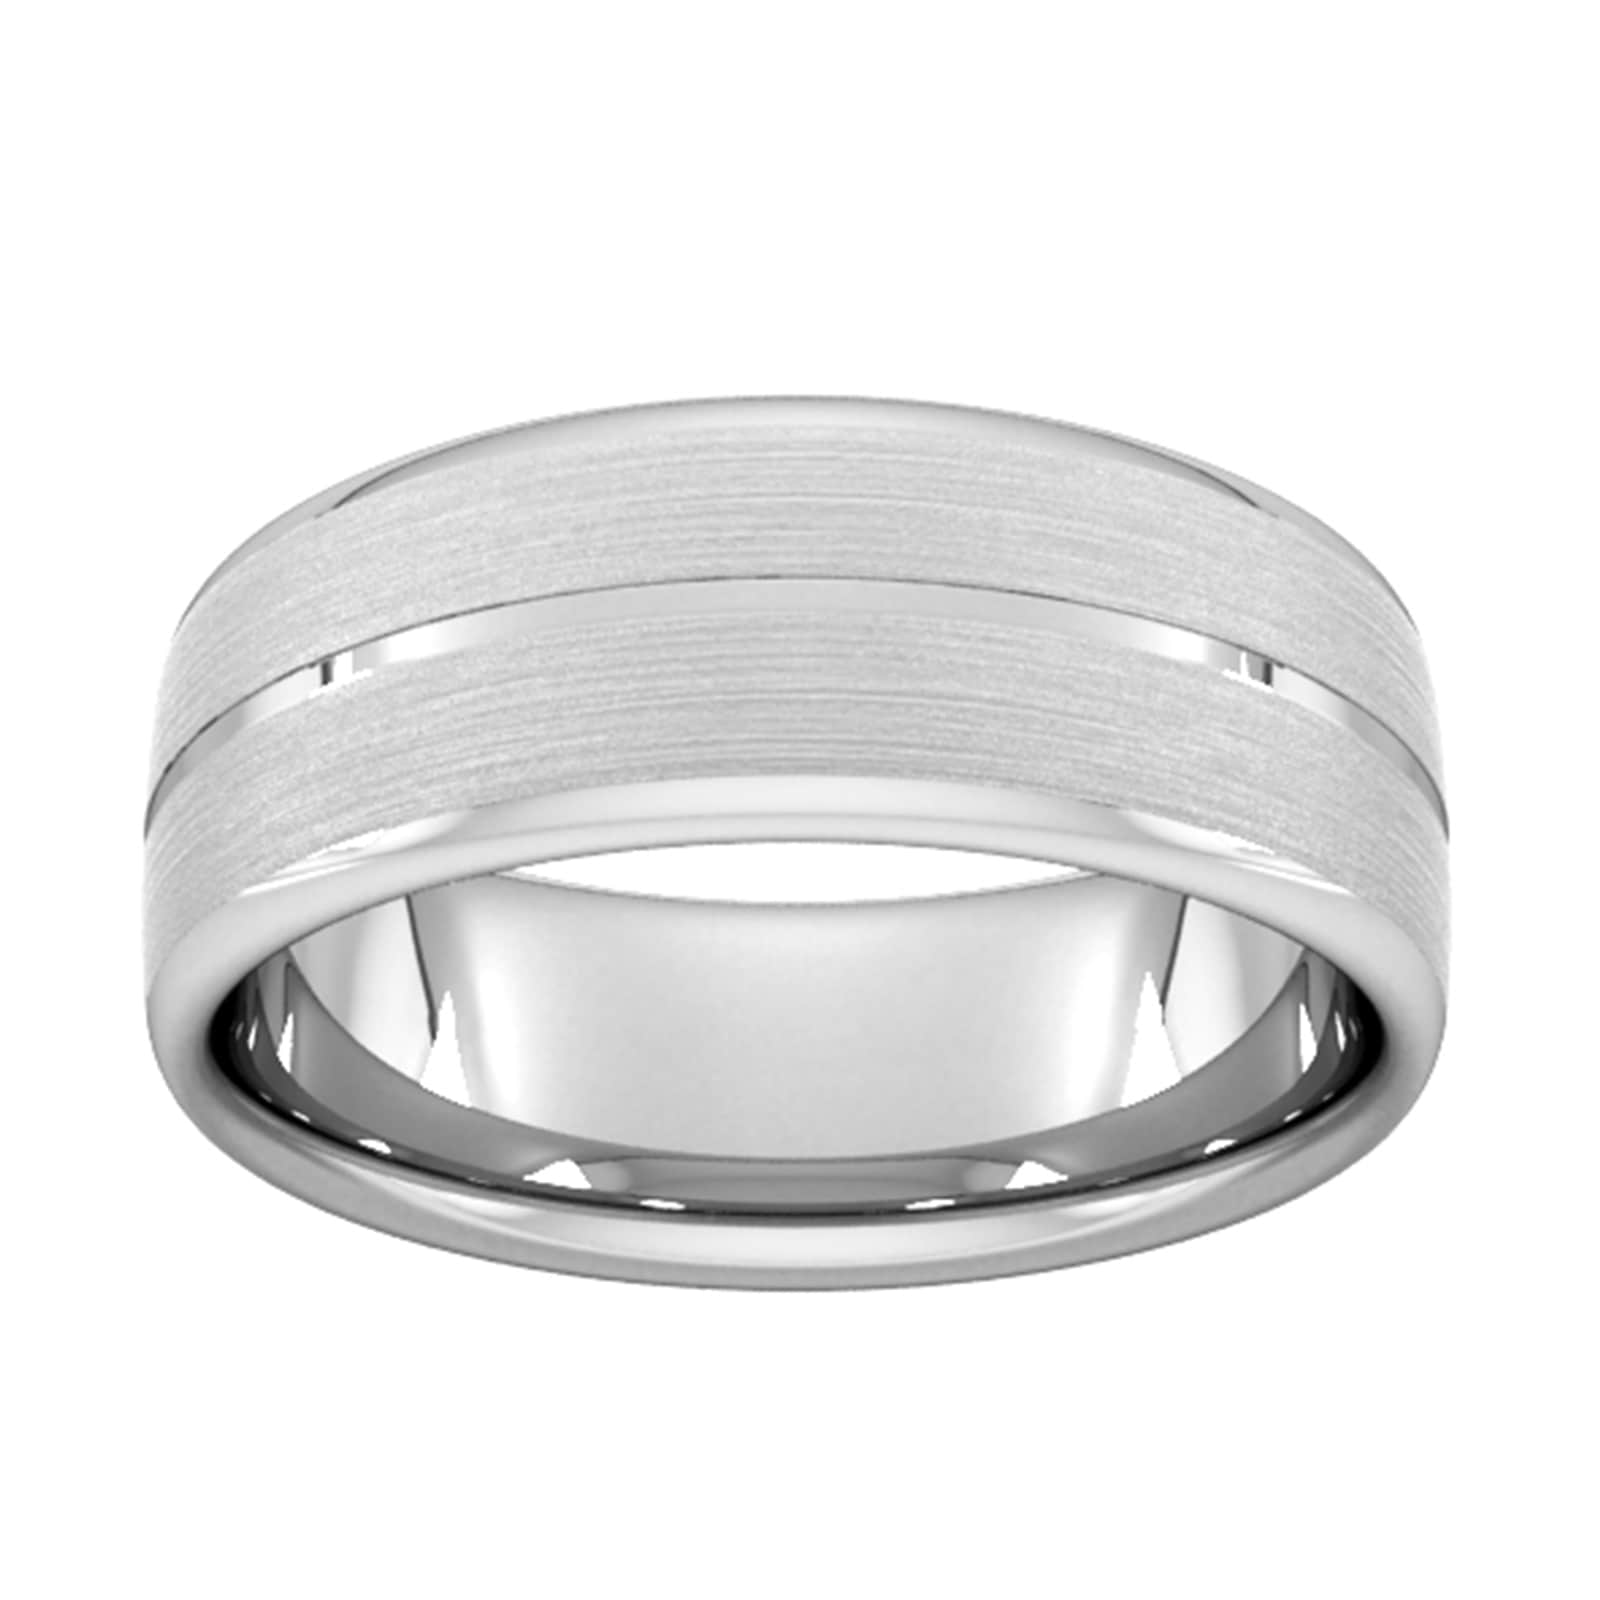 8mm Traditional Court Standard Centre Groove With Chamfered Edge Wedding Ring In 18 Carat White Gold - Ring Size L